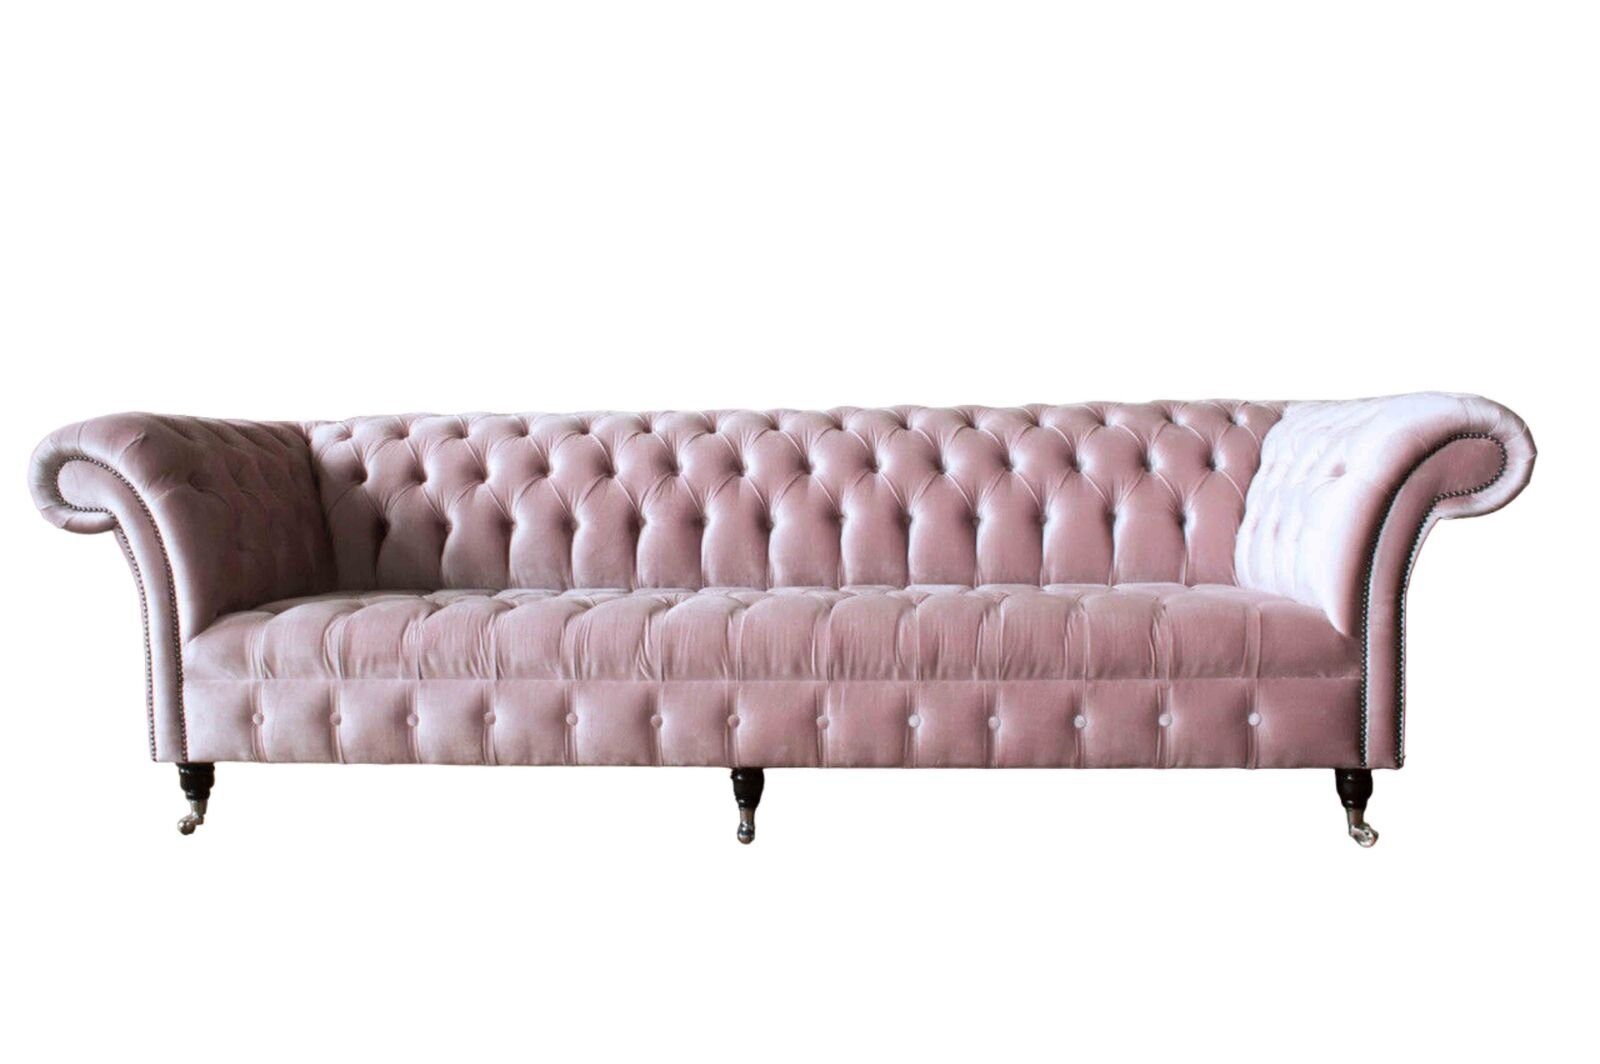 4 Sofa Sitz Polster Made Europe Chesterfield Rosa Couch Couchen In Sitzer JVmoebel Sofa Sofas Neu,